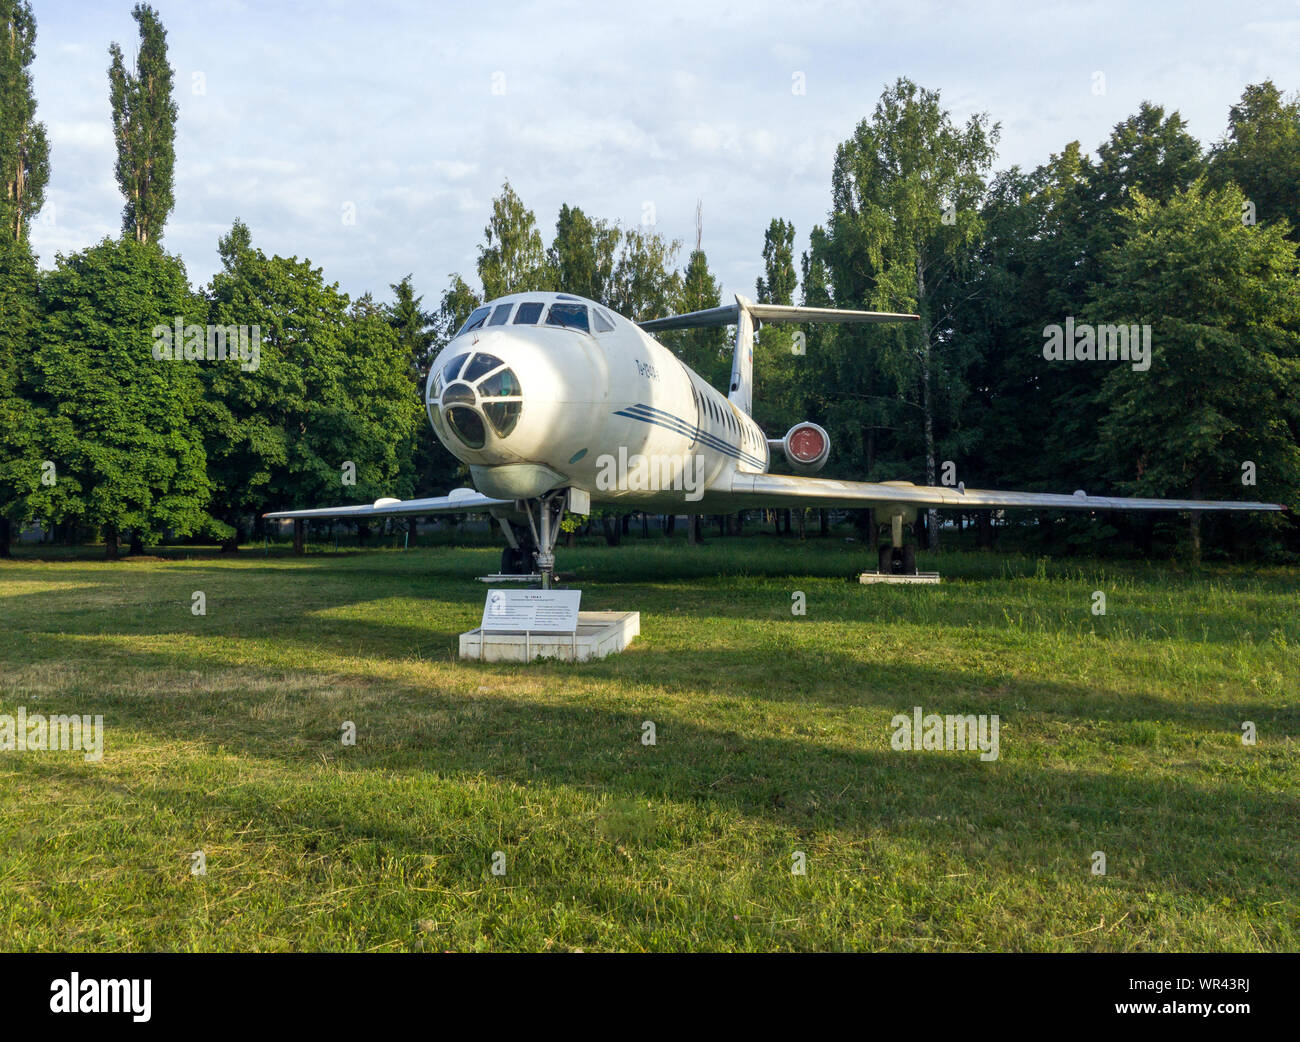 Voronezh, Russia - July 14, 2018: Monument to the Tu-134 aircraft at the Voronezh airport Stock Photo